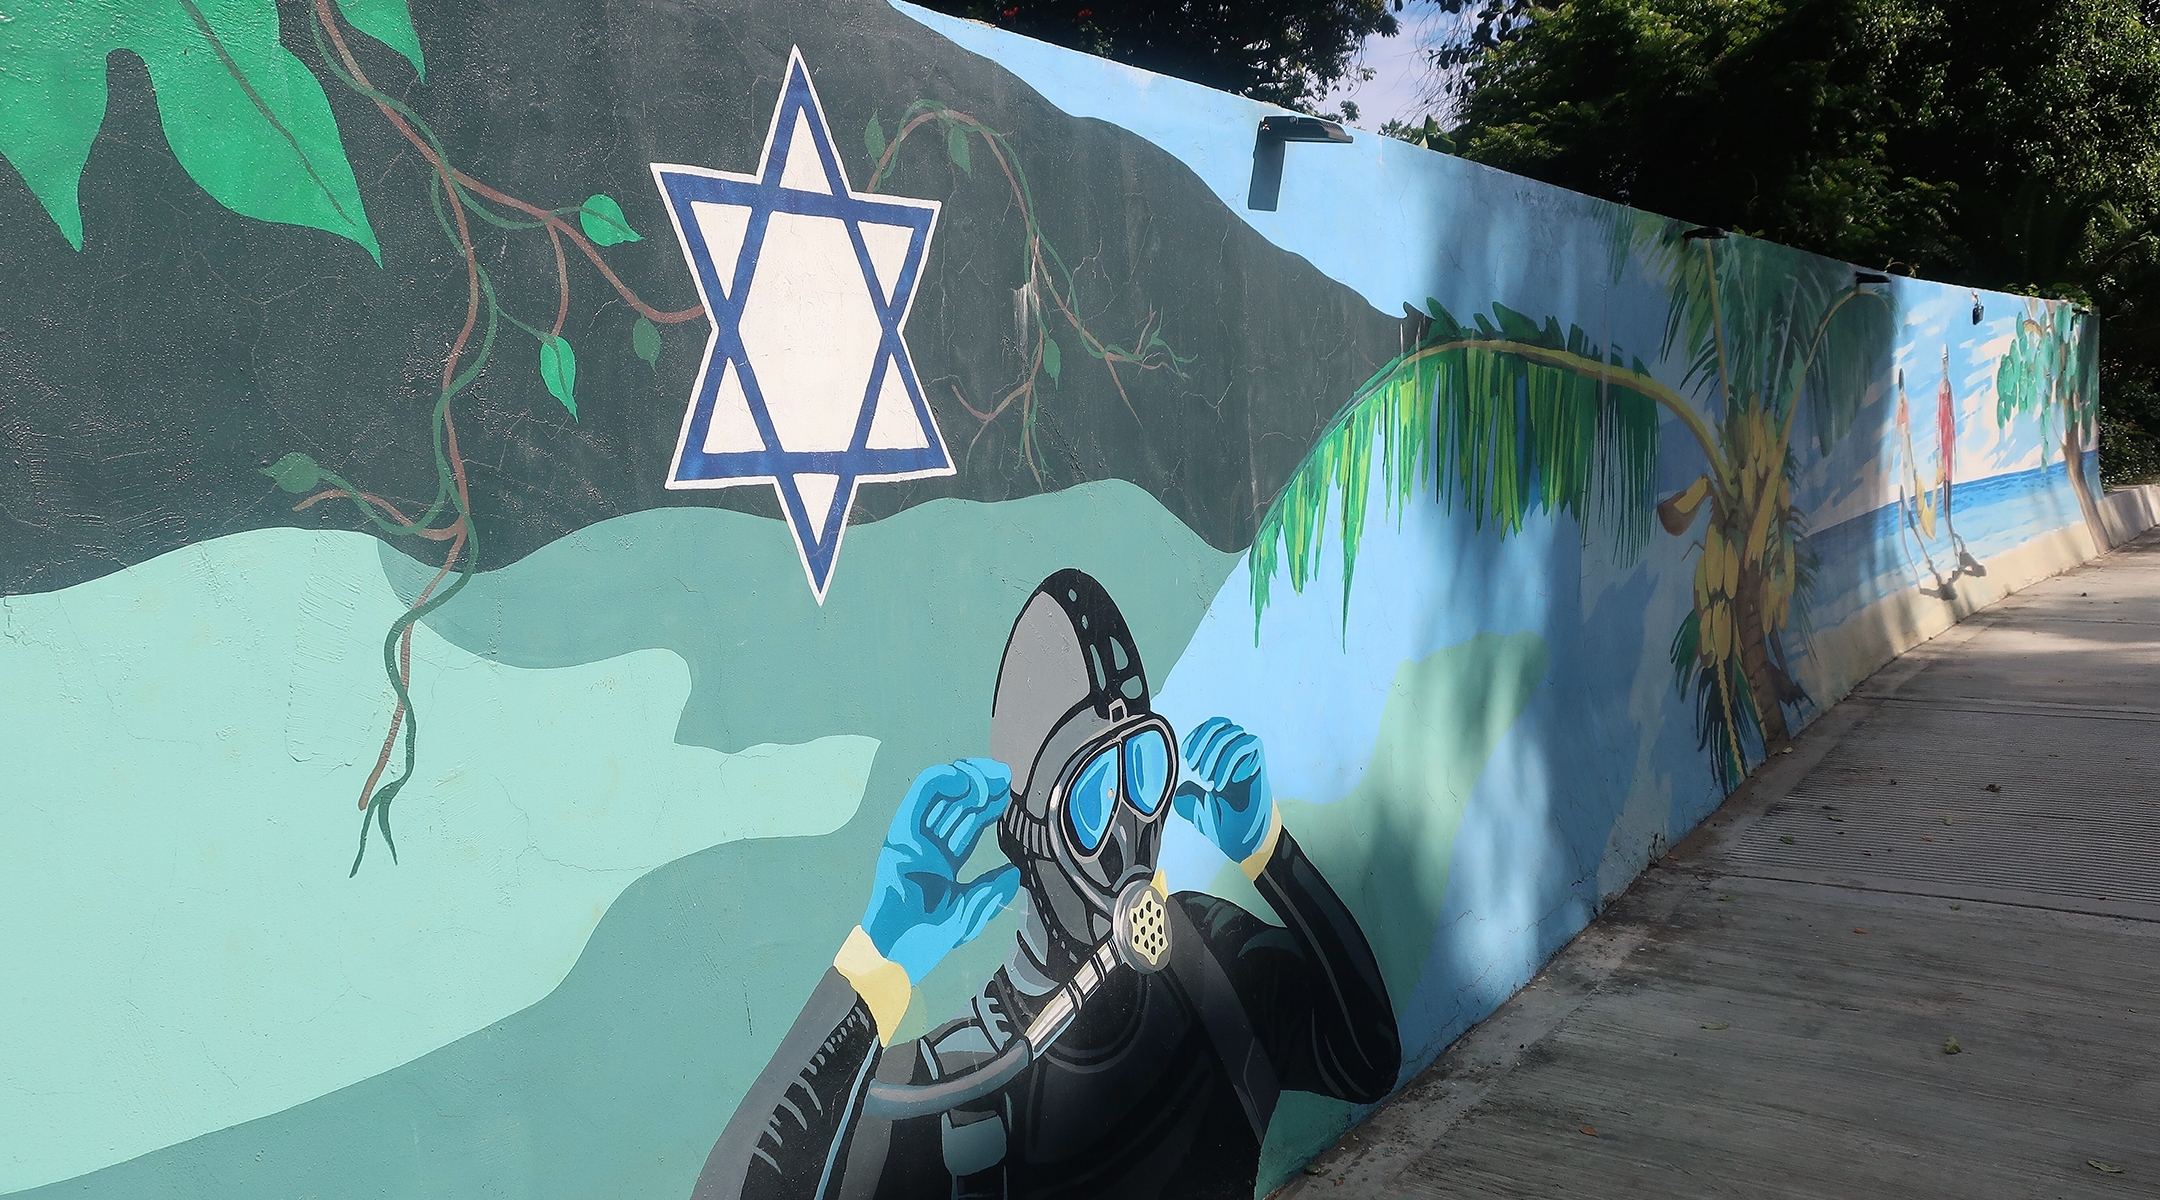 A street mural recognizes Sosua’s Jewish history on the main road connecting Sosua with Puerto Plata on the north coast of the Dominican Republic. (Dan Fellner)